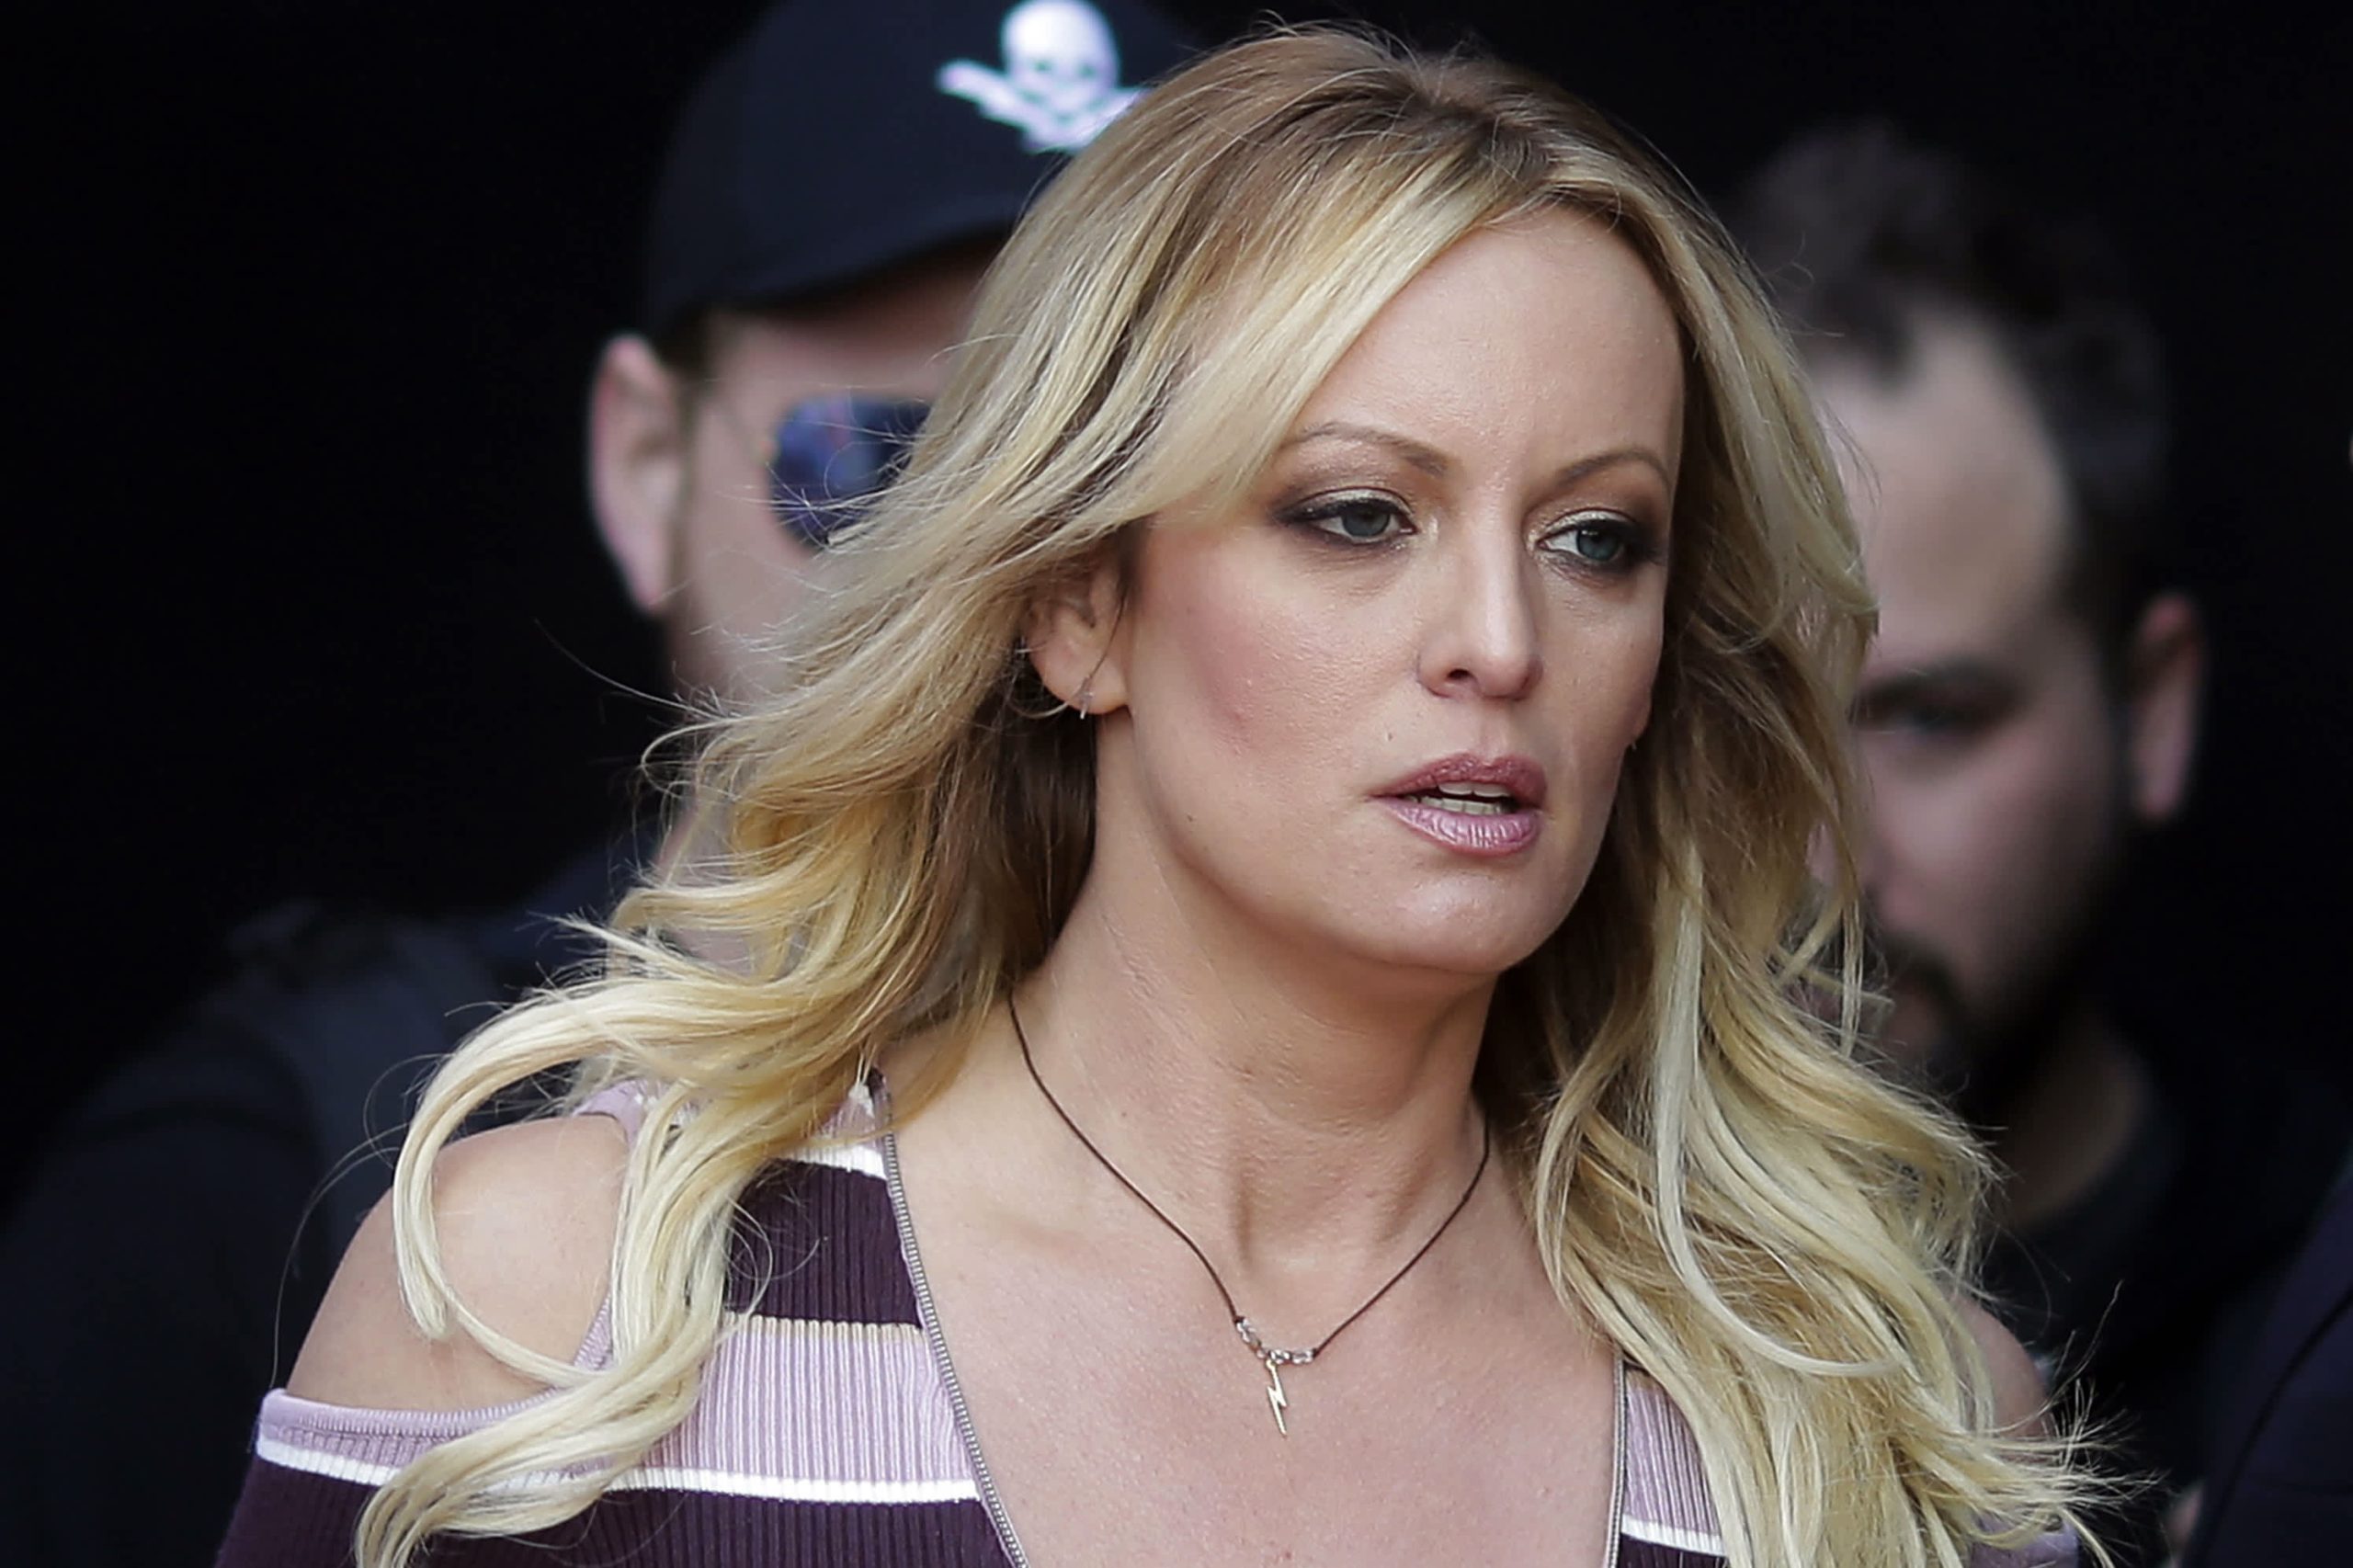 Stormy Daniels On What She’ll Do If Trump “Is Selected To Go To Jail